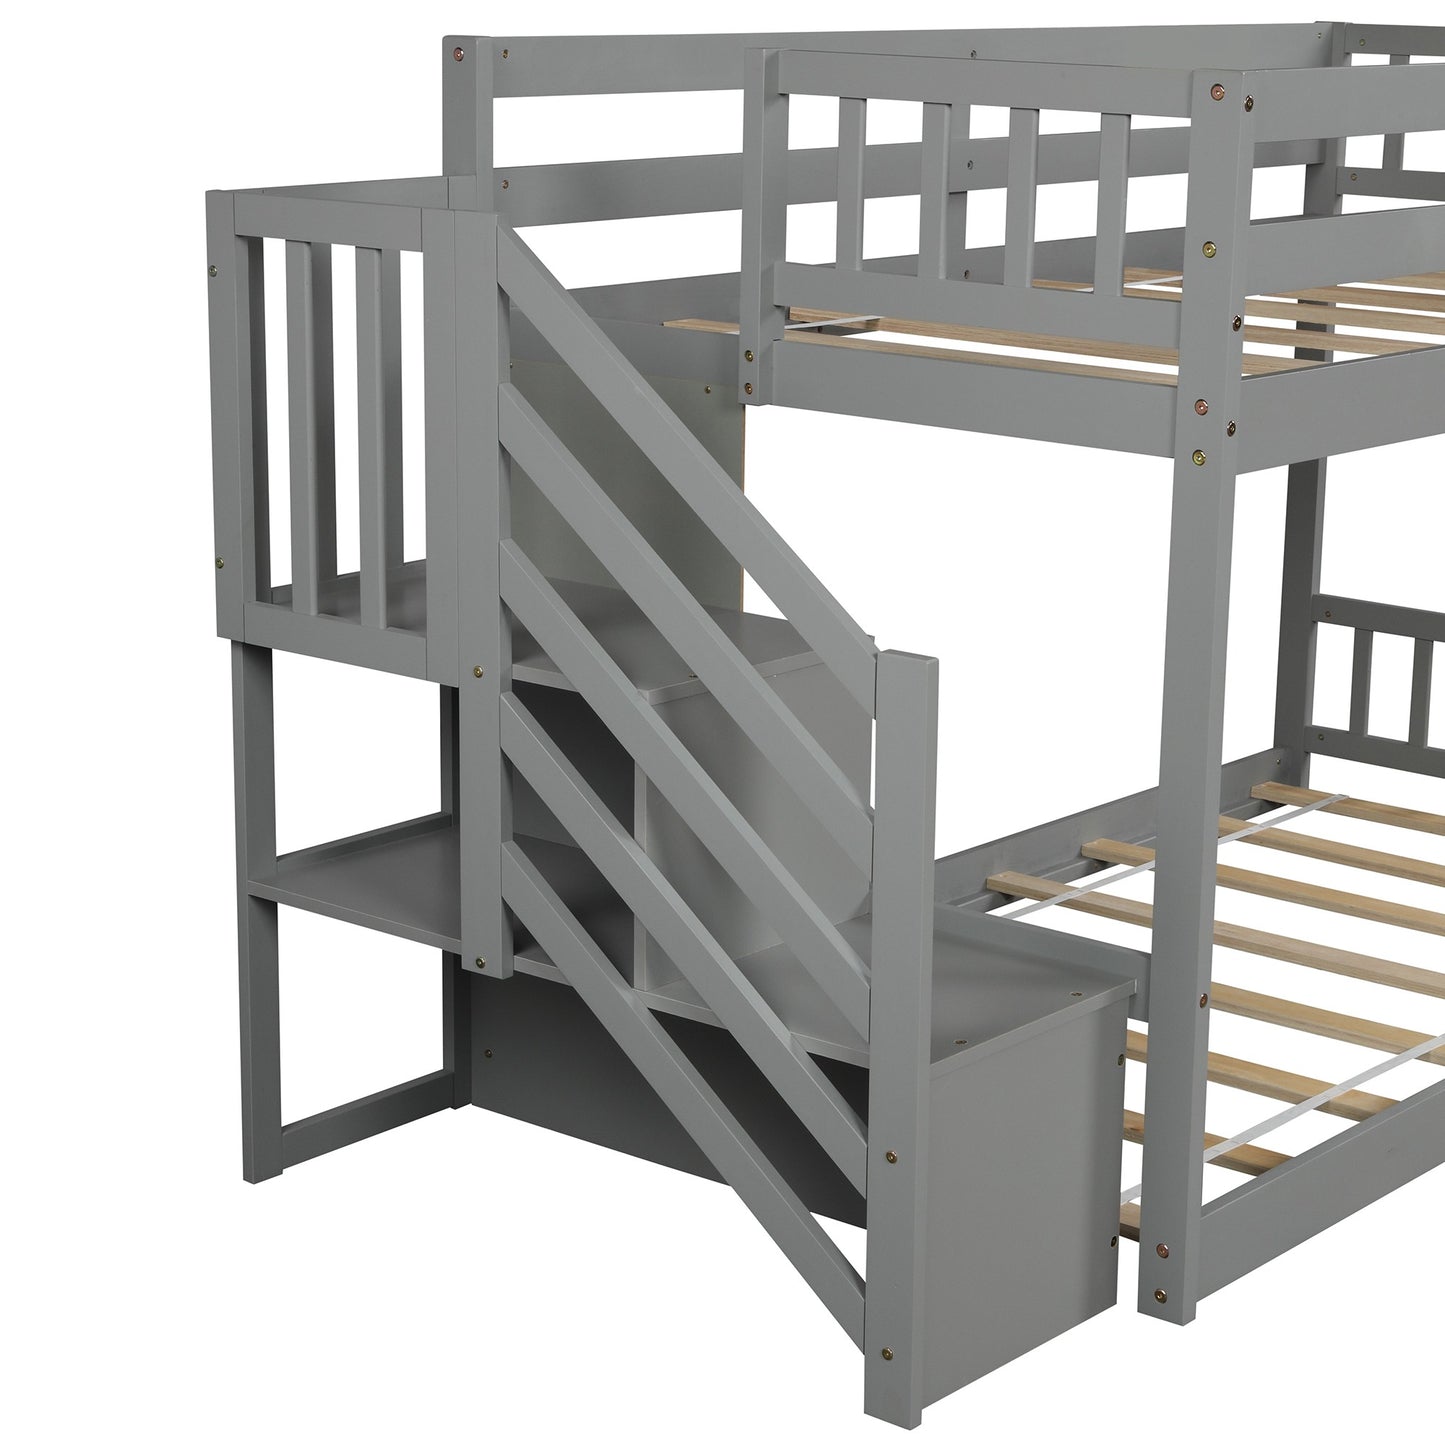 Gray Twin Over Twin Staircase Bunk Bed